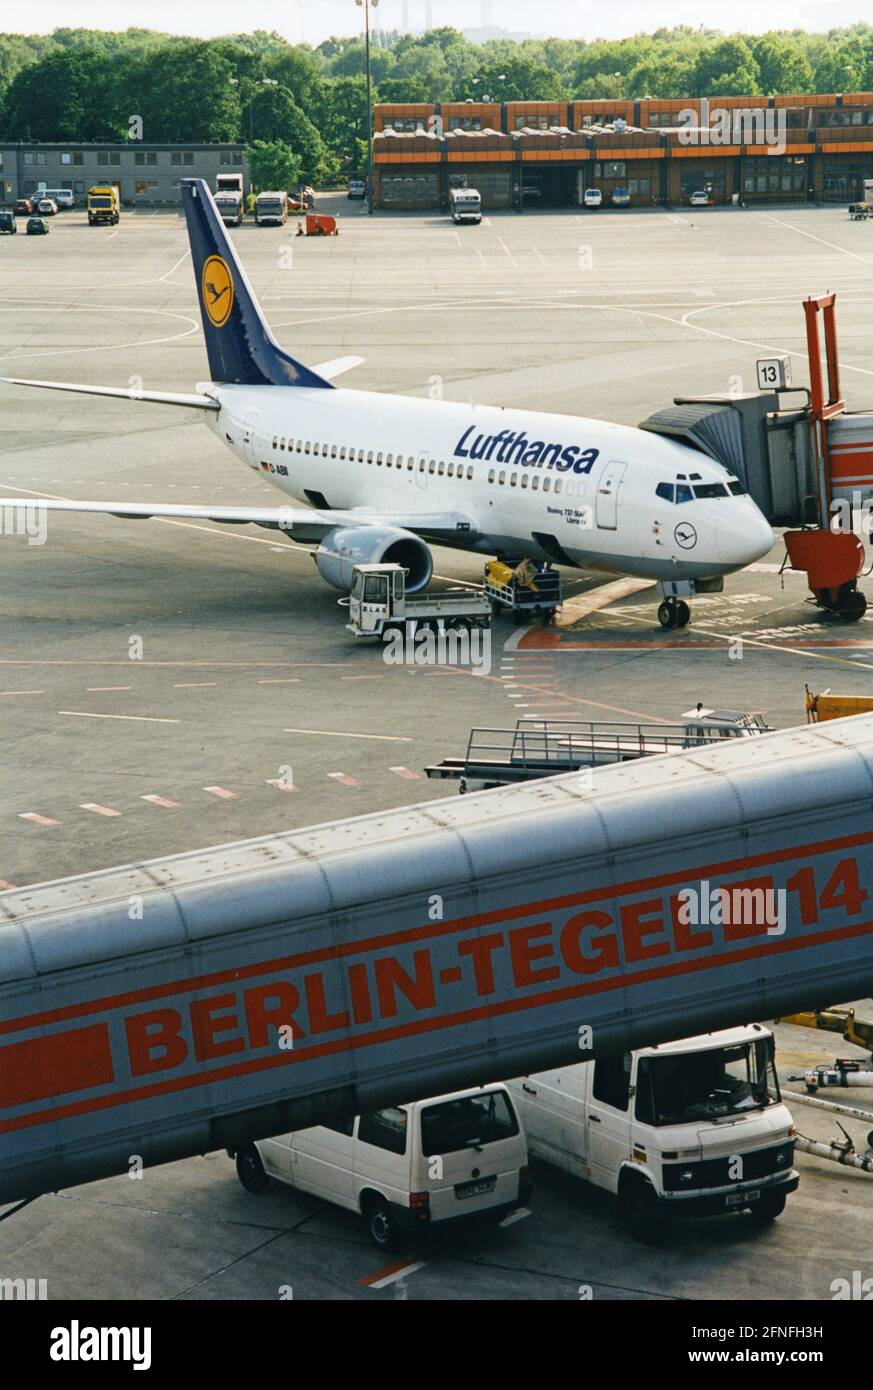 'A Lufthansa Boeing 737-500 (registration D-ABII, baptismal name ''Lörrach'') at the gate at Berlin-Tegel Airport. [automated translation]' Stock Photo